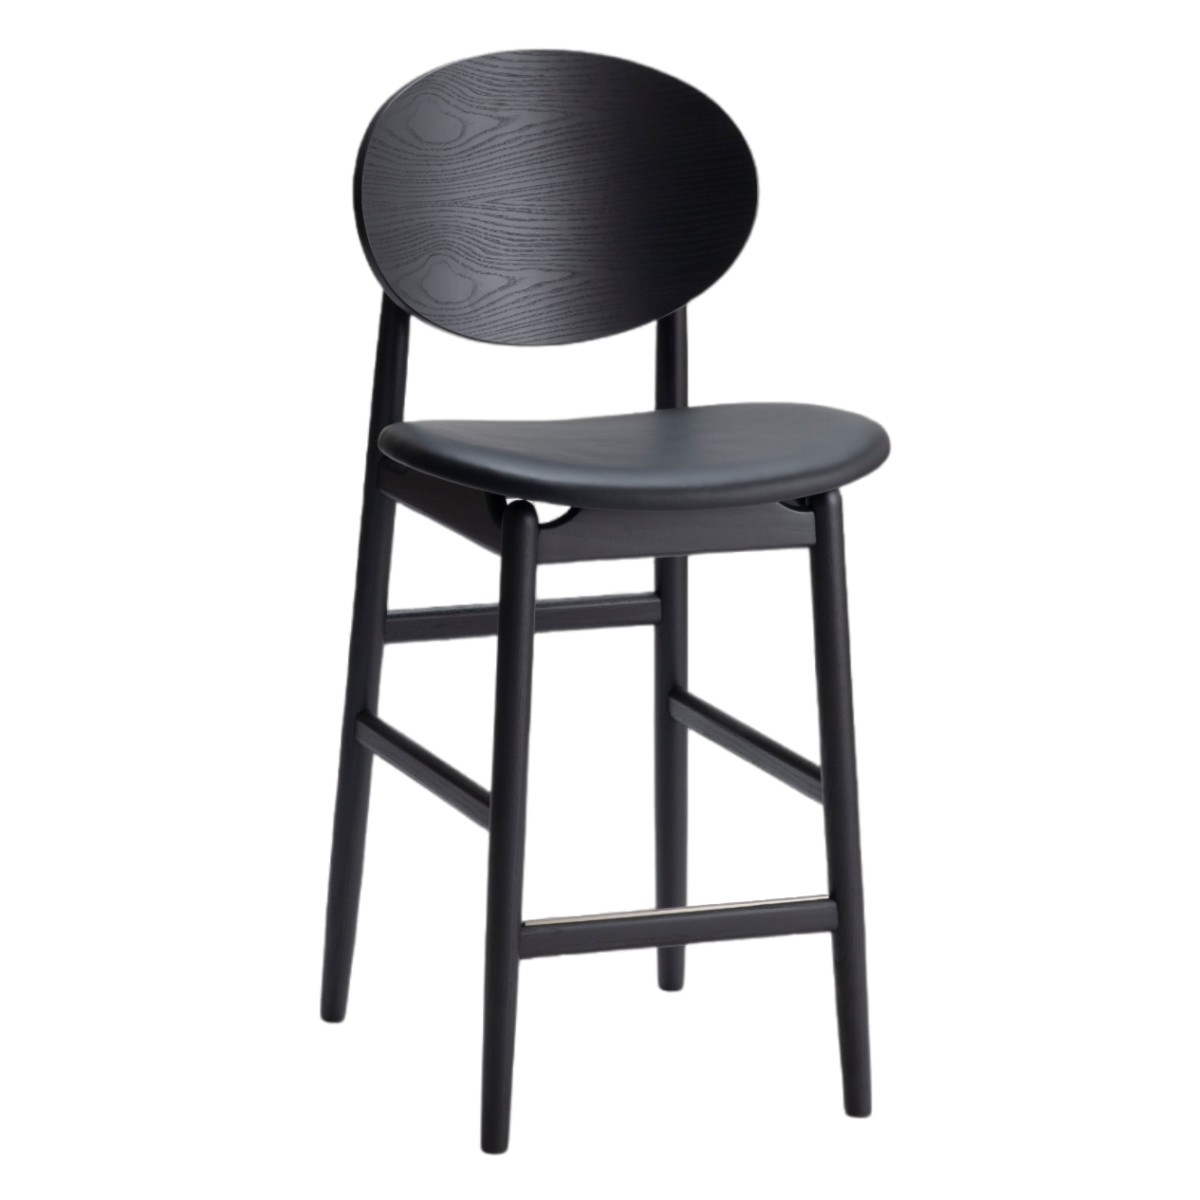 Outline Barstool with Leather Seat